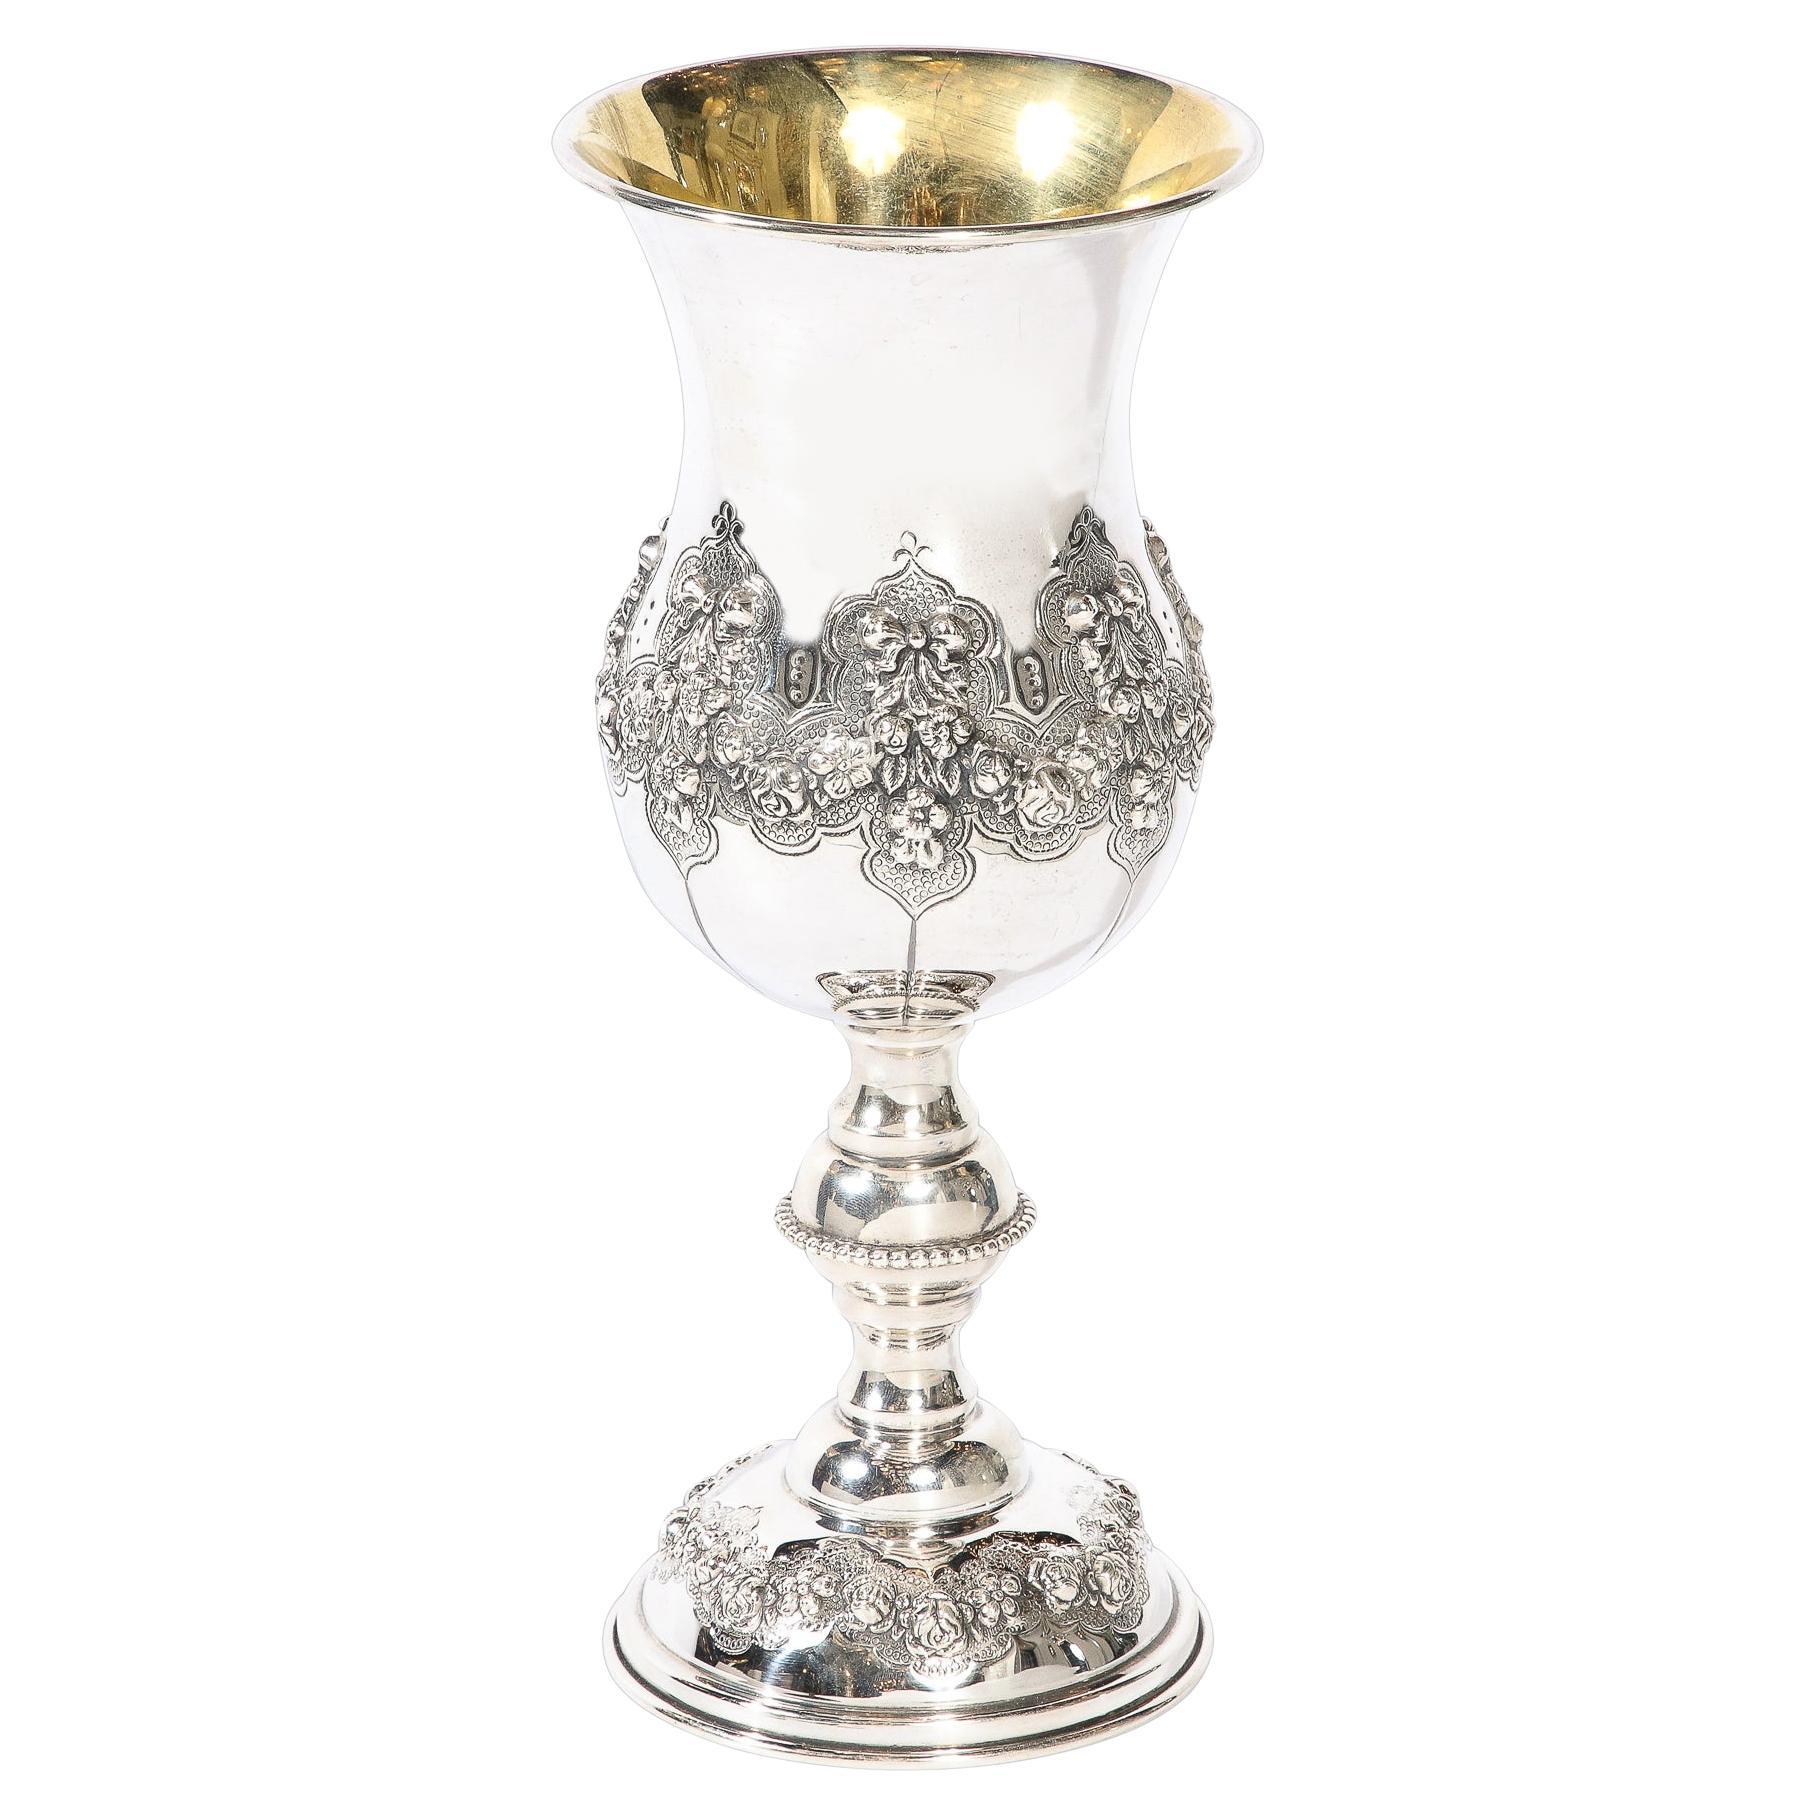 Monumental Sterling  Kiddish Goblet with Repousse Designs  by Hadad Brothers For Sale